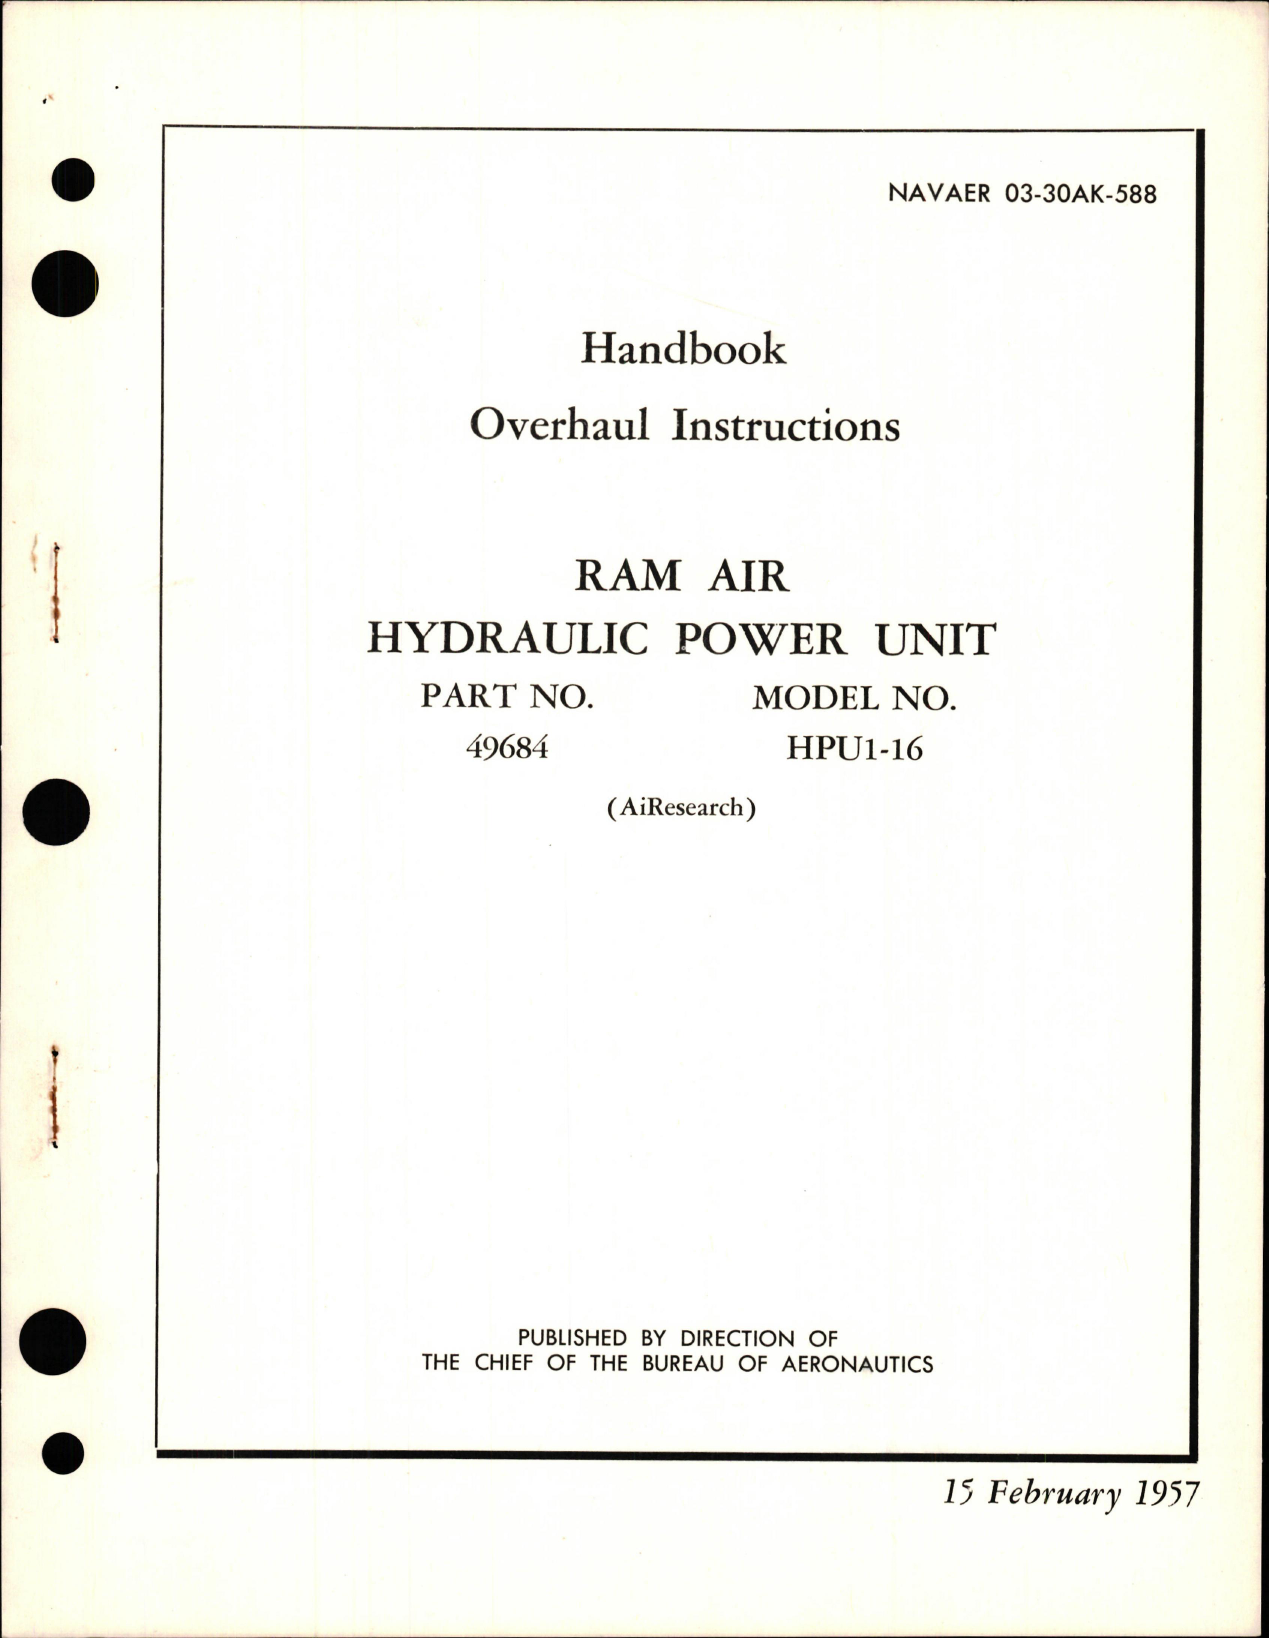 Sample page 1 from AirCorps Library document: Overhaul Instructions for Ram Air Hydraulic Power Unit - Part 49684 - Model HPU1-16 